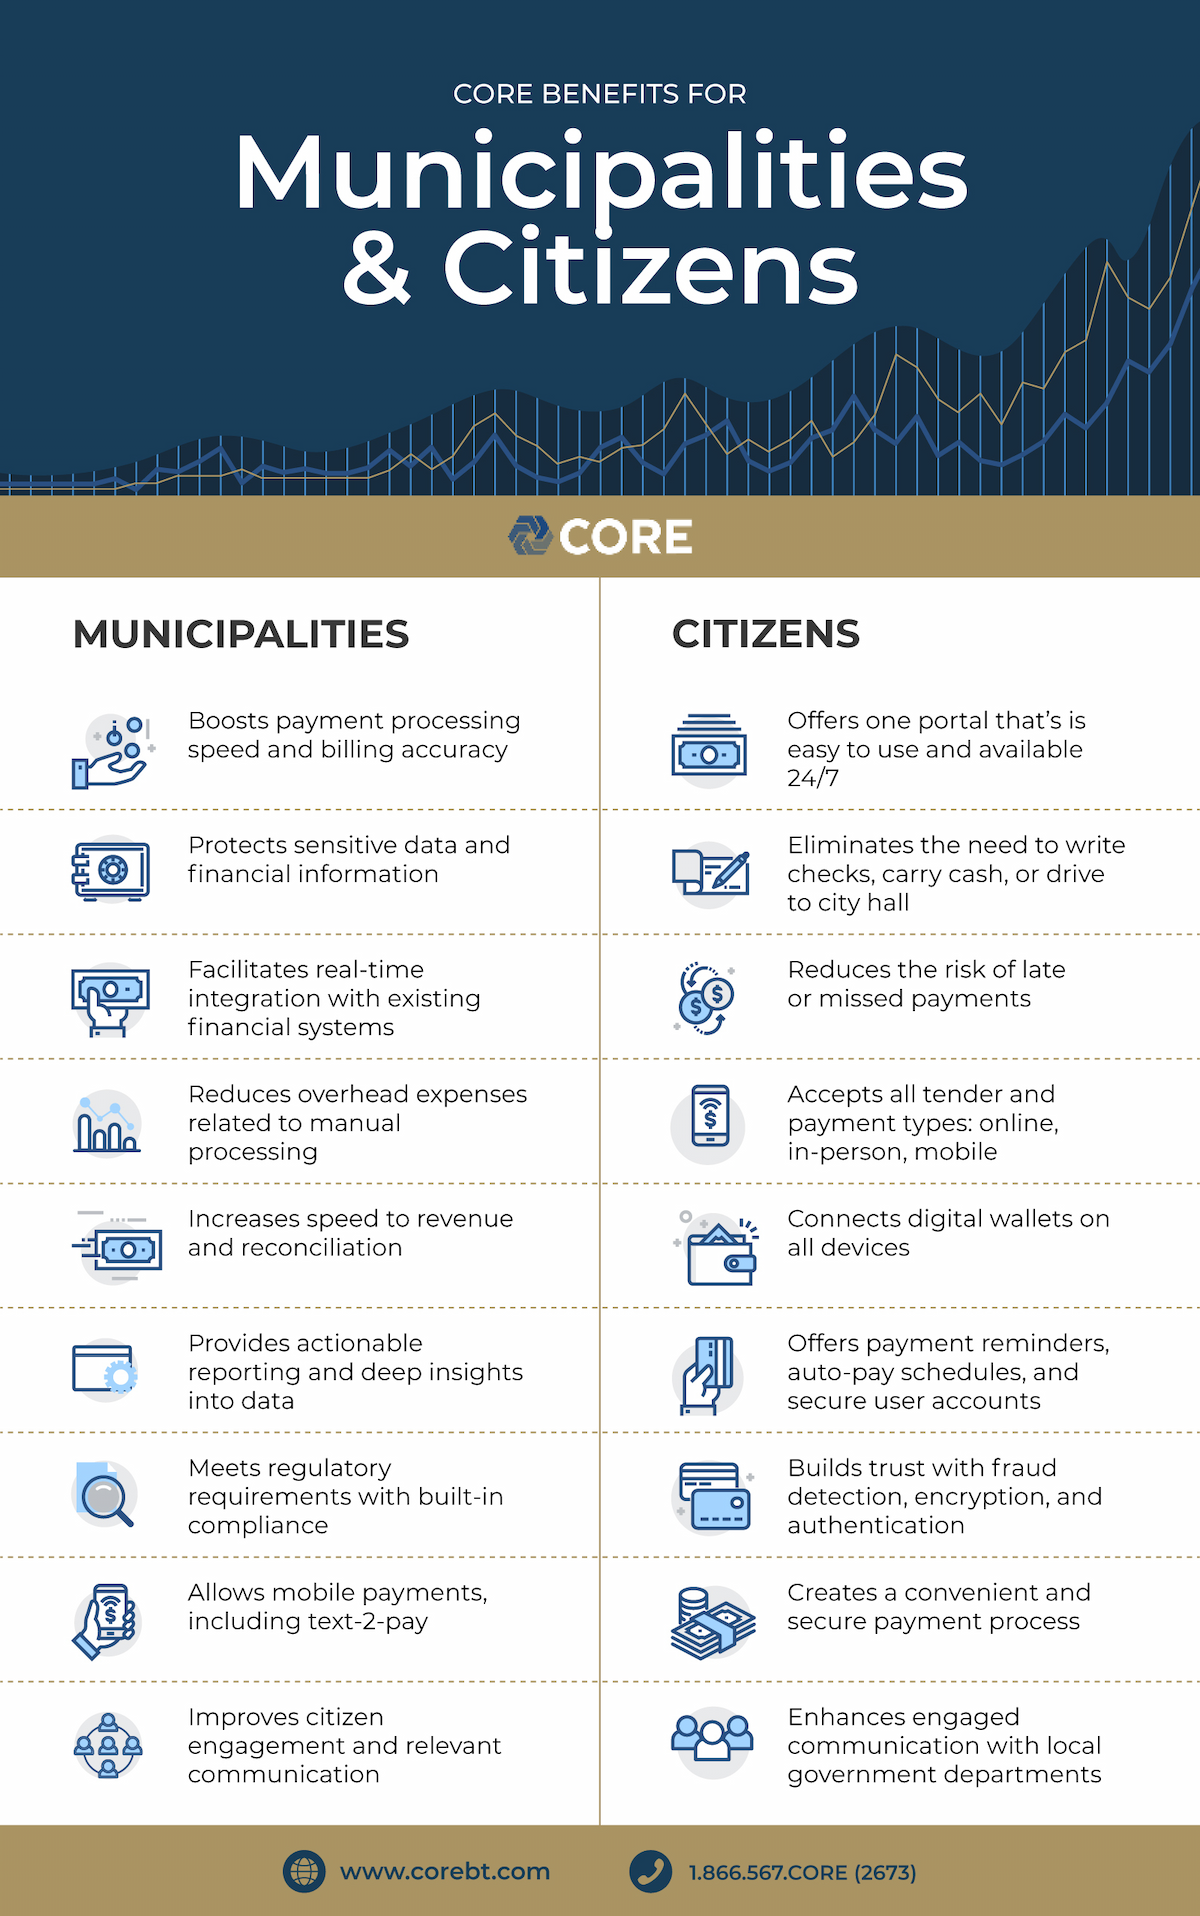 infographic explaining the benefits of CORE's system for both municipalities and citizens